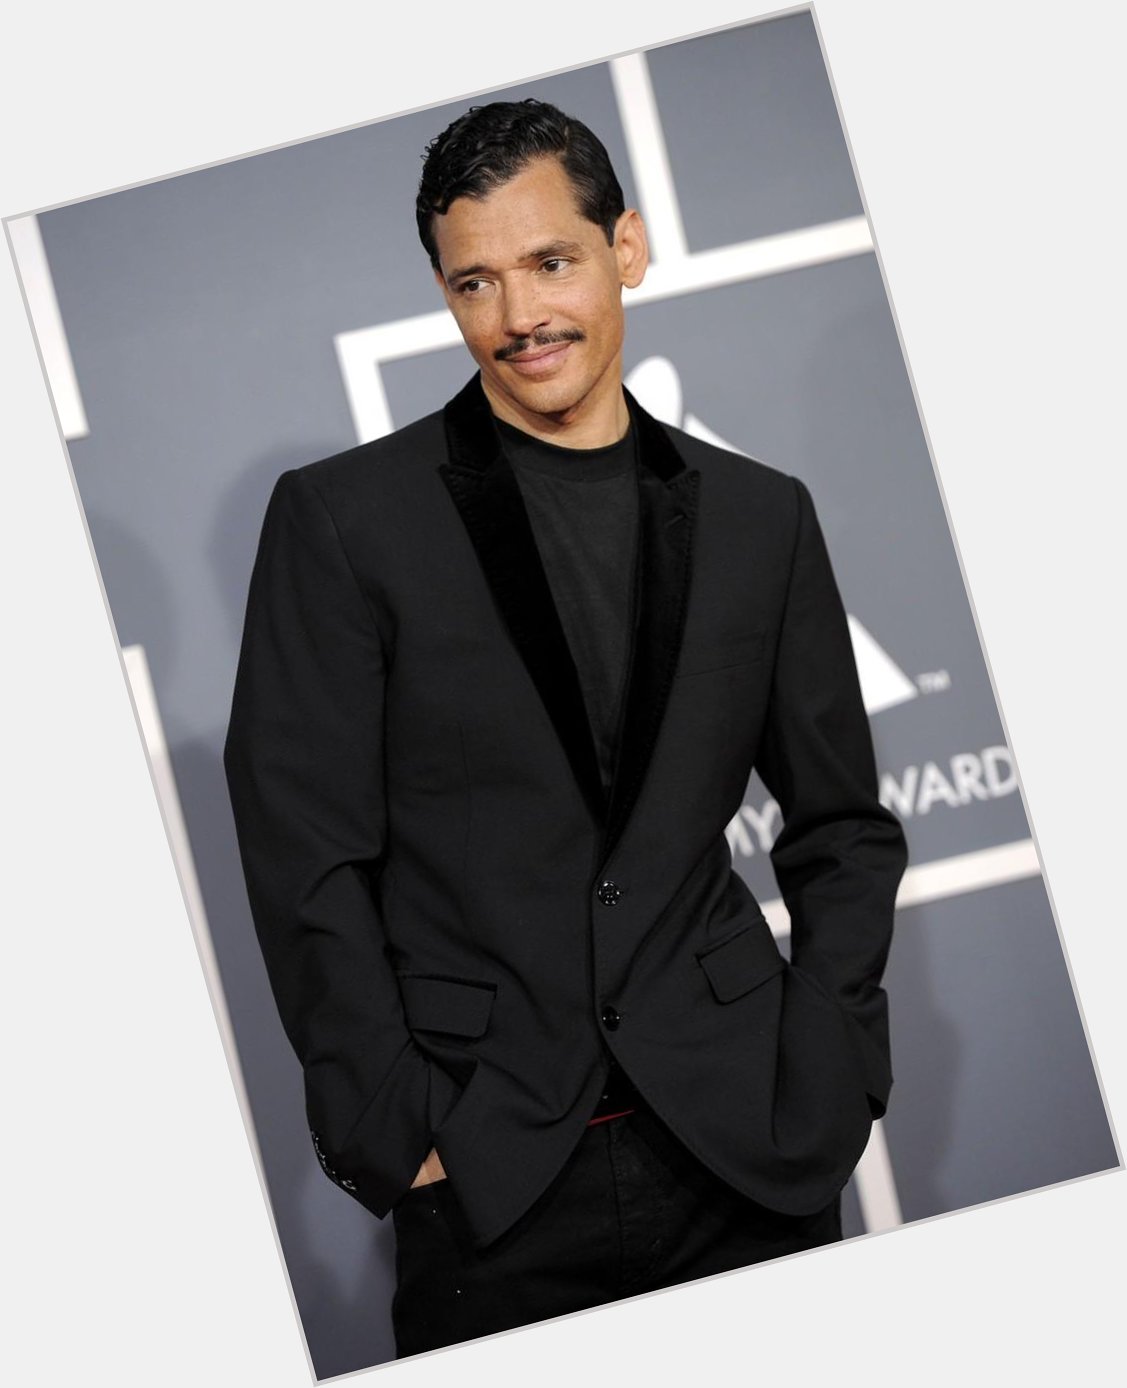 Happy Birthday to El DeBarge, who turns 54 today! 